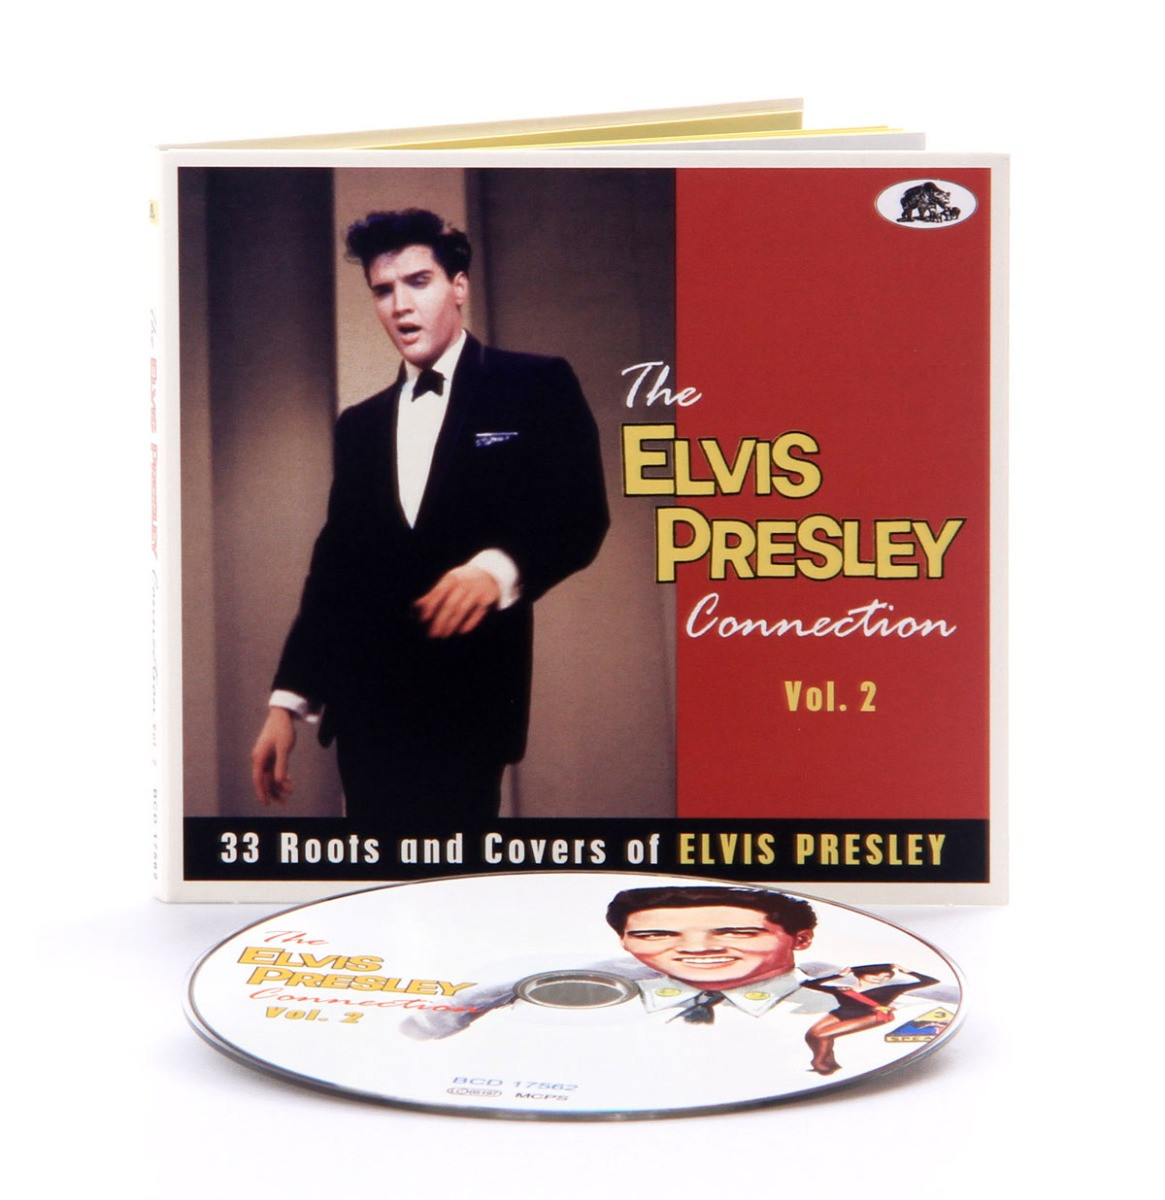 Various Artists - The Elvis Presley Connection Volume 2 (33 Roots And Covers Of Elvis Presley) CD